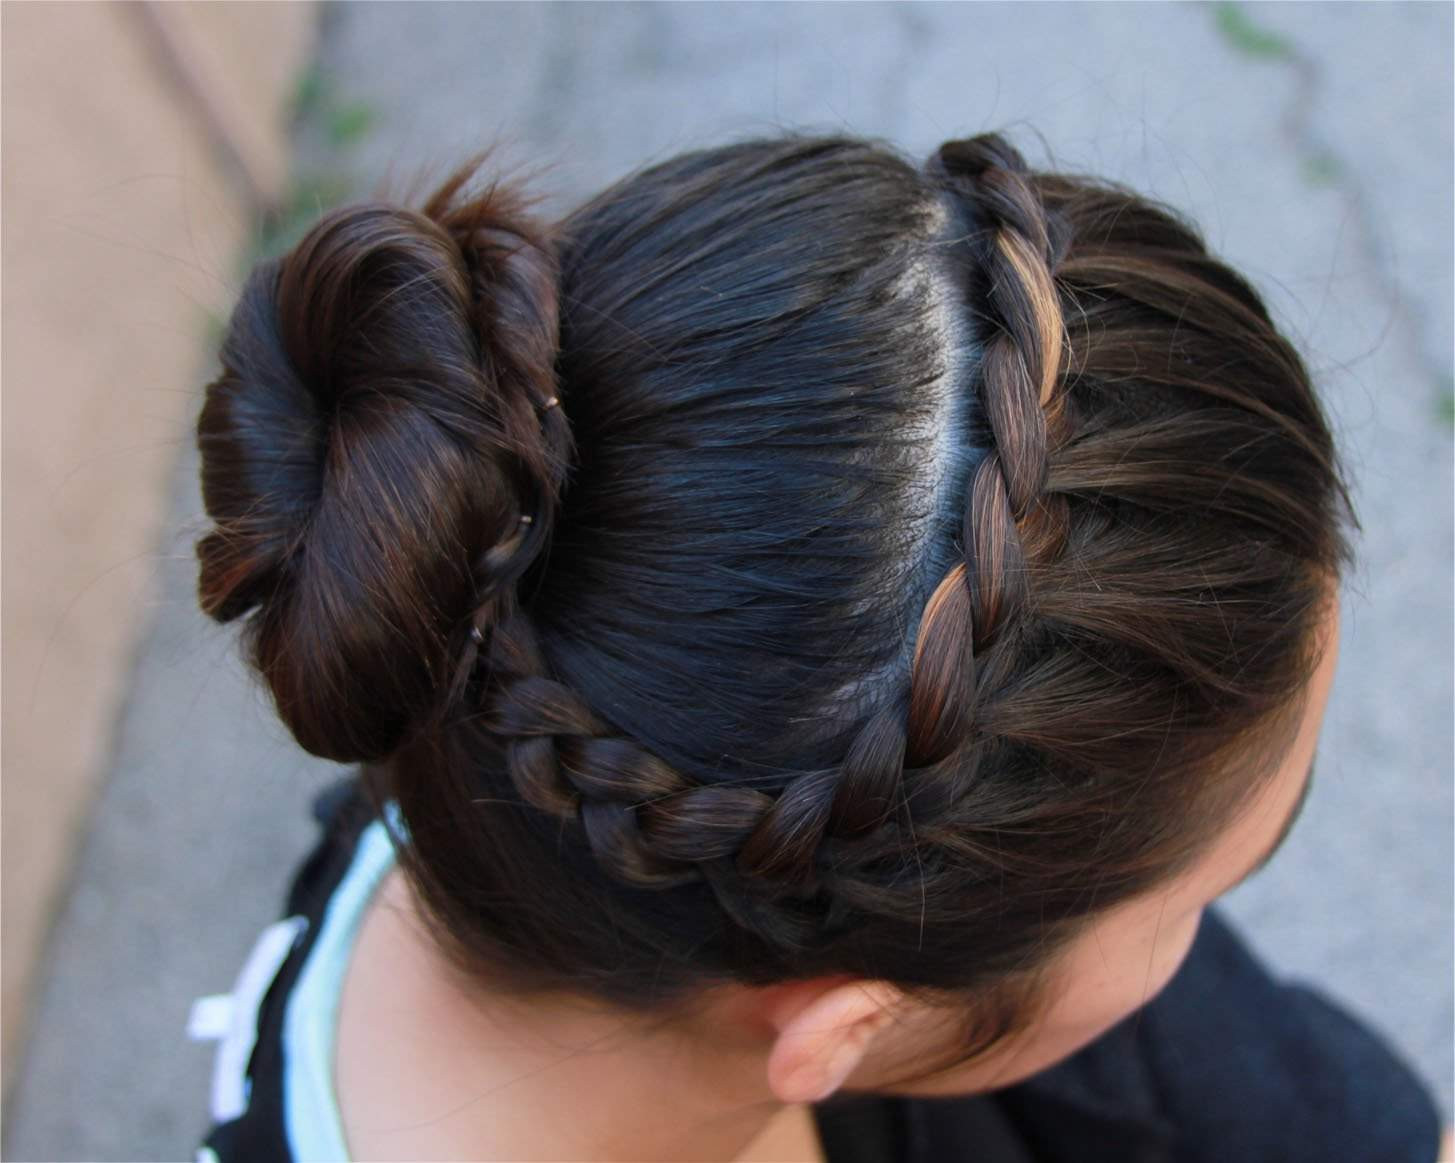 Easy French Braid Hairstyles
 Easy Buns and Braided Hairstyles